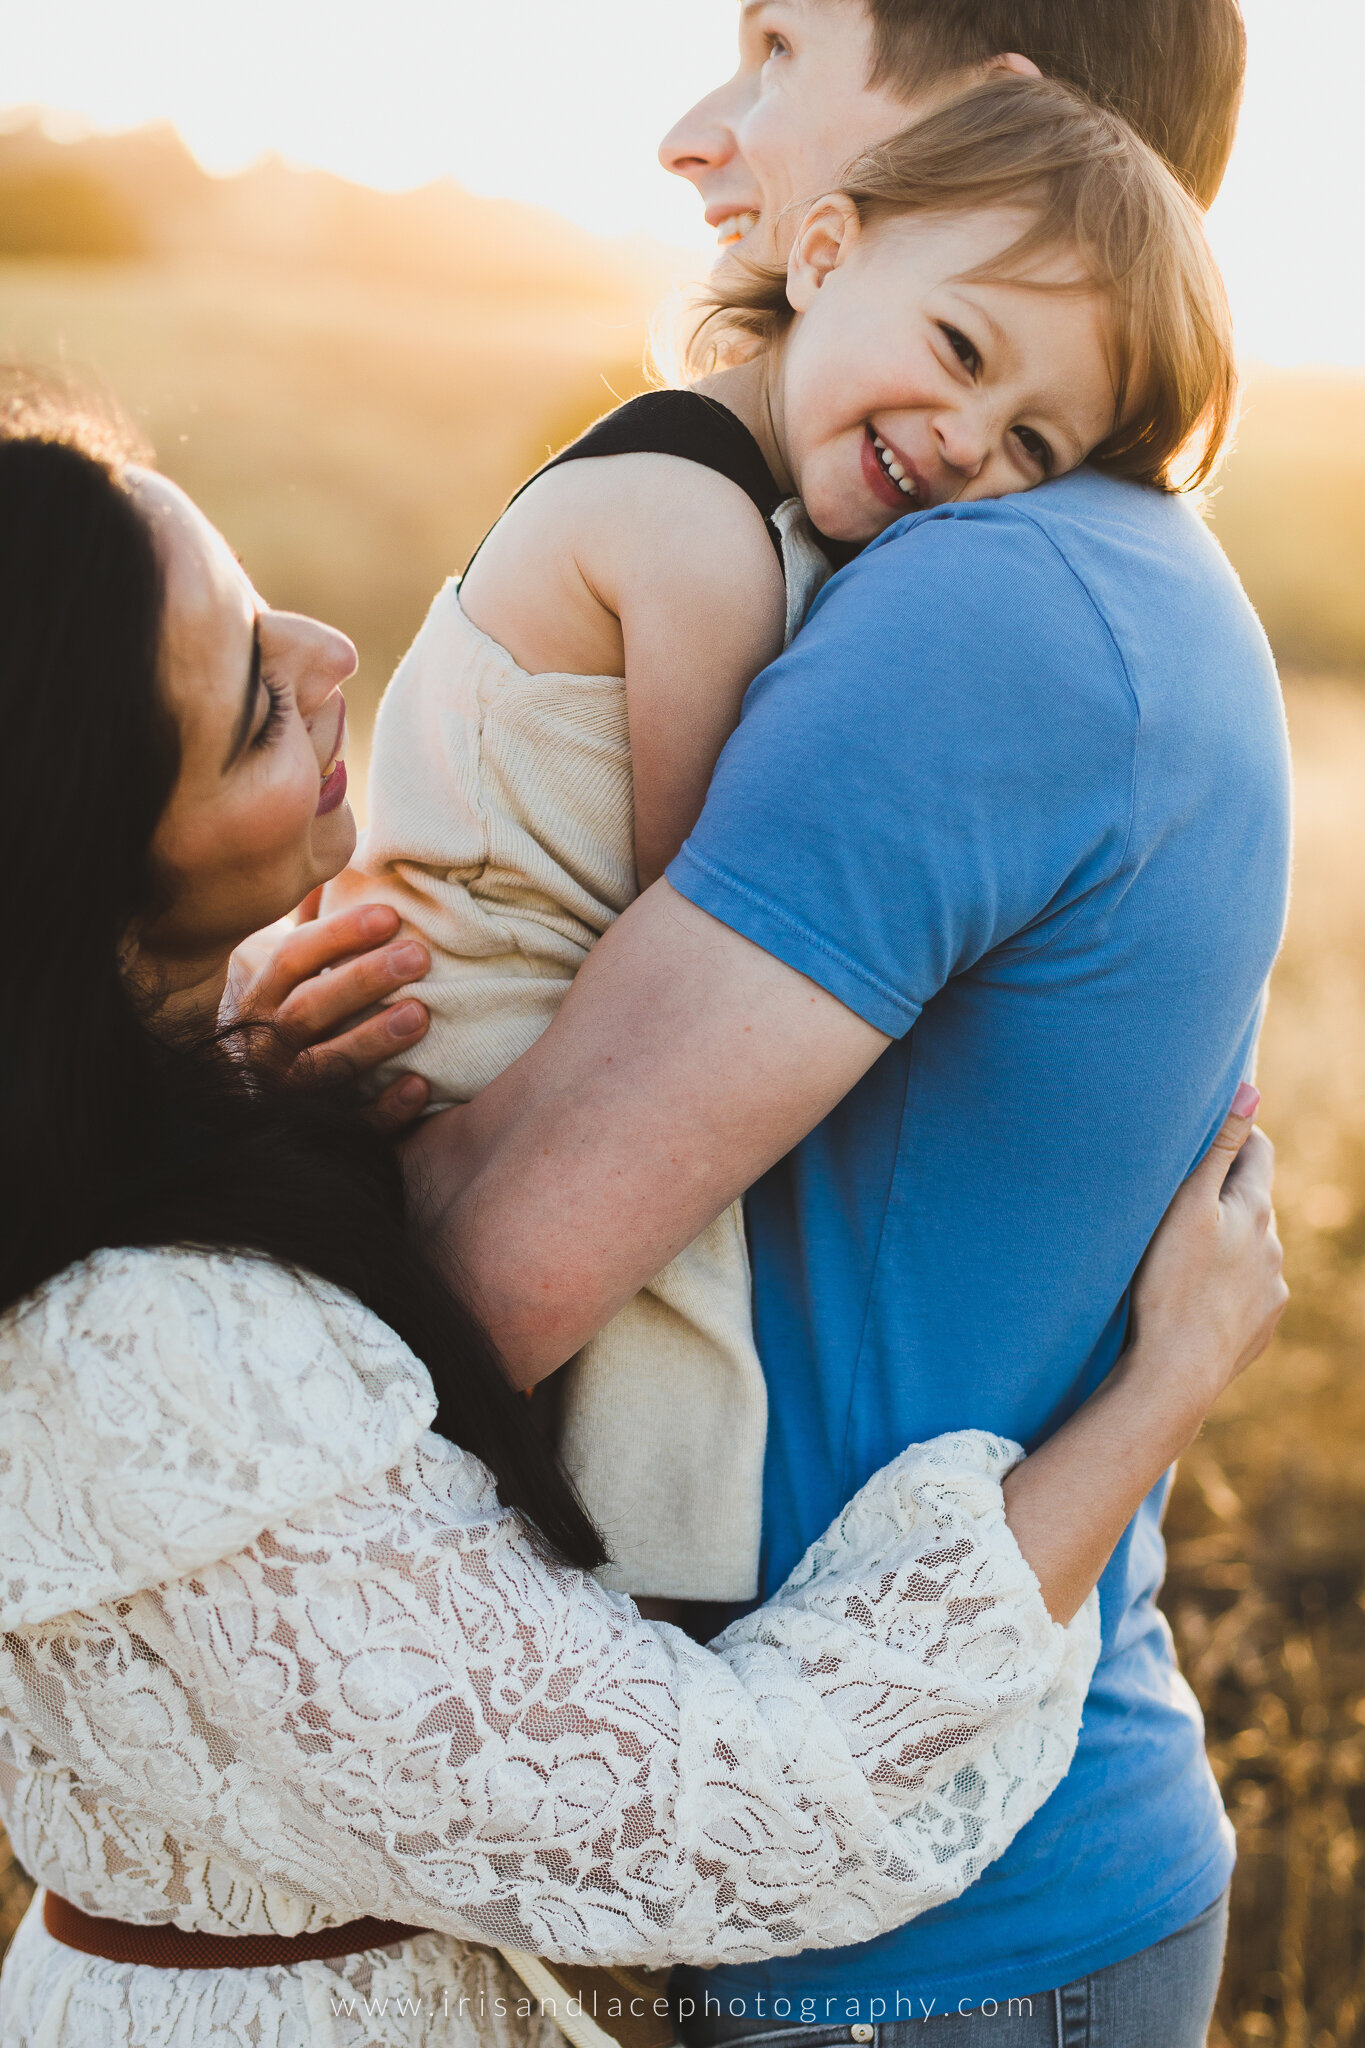 Family Photos in San Jose, CA |  Iris and Lace Photography